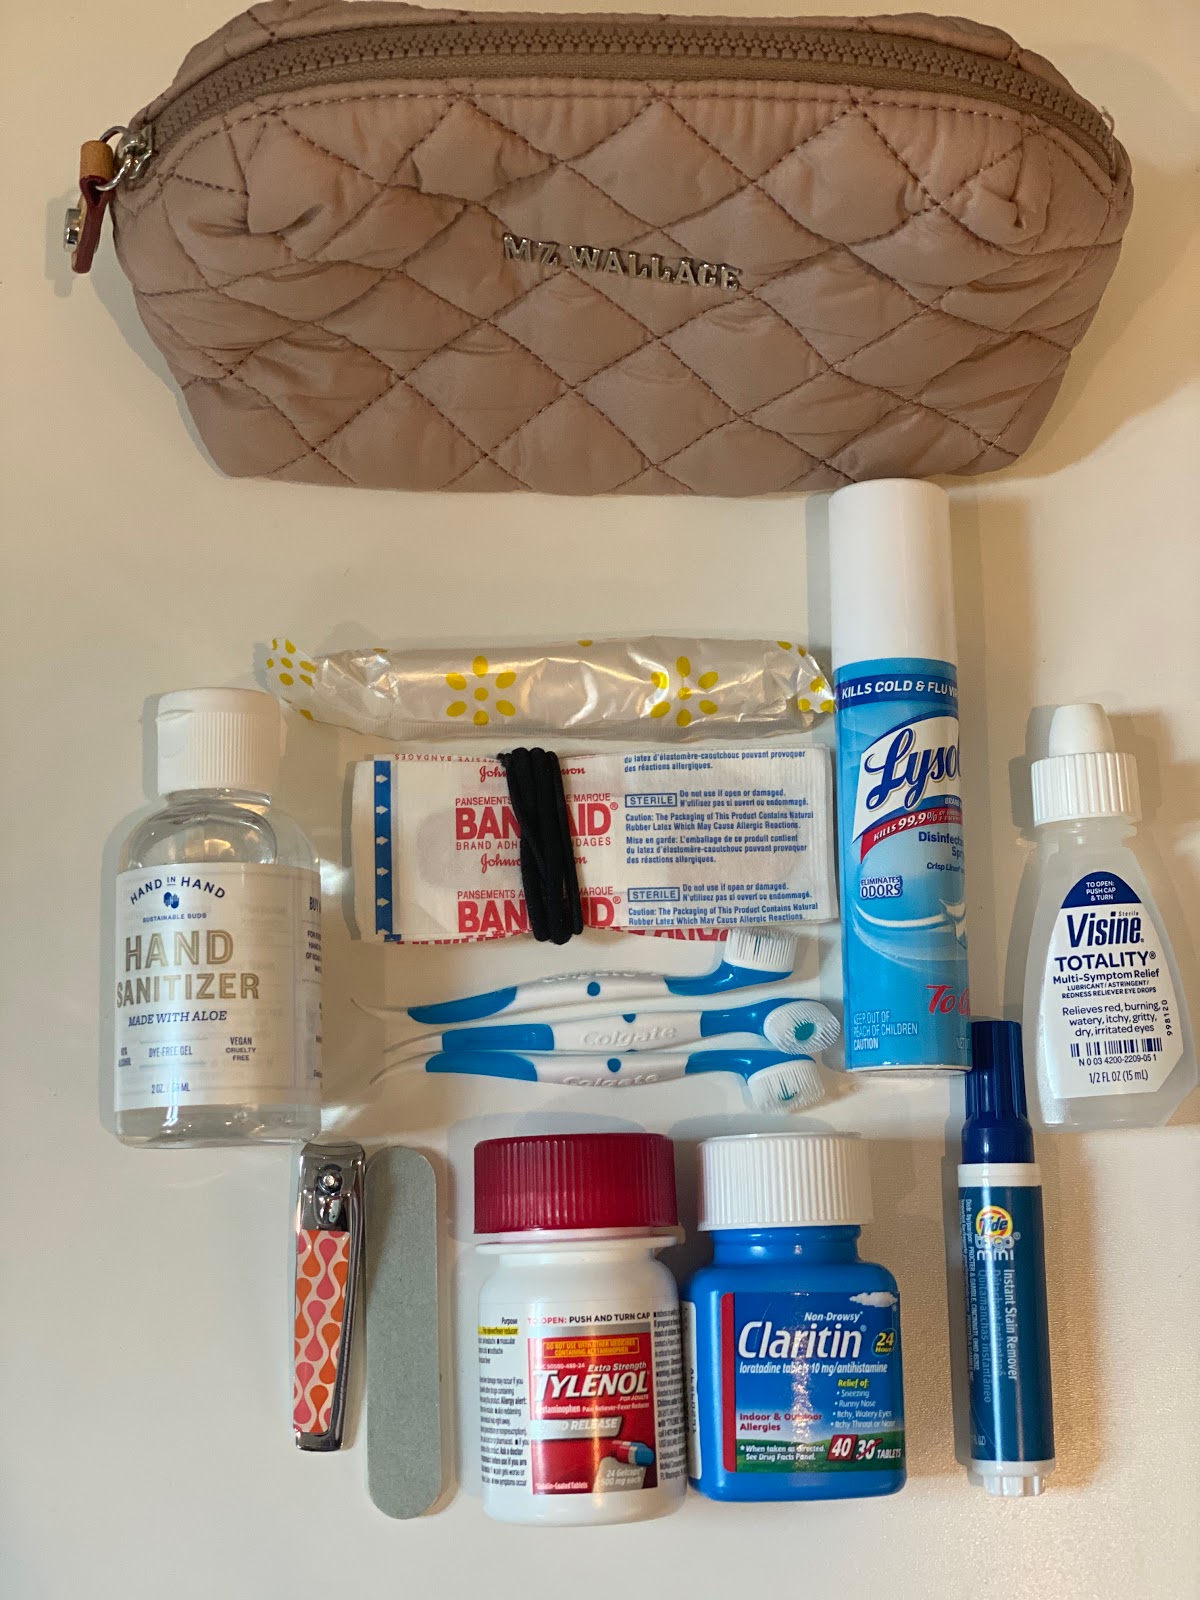 A mini emergency kit to carry in your bag at all times, just in